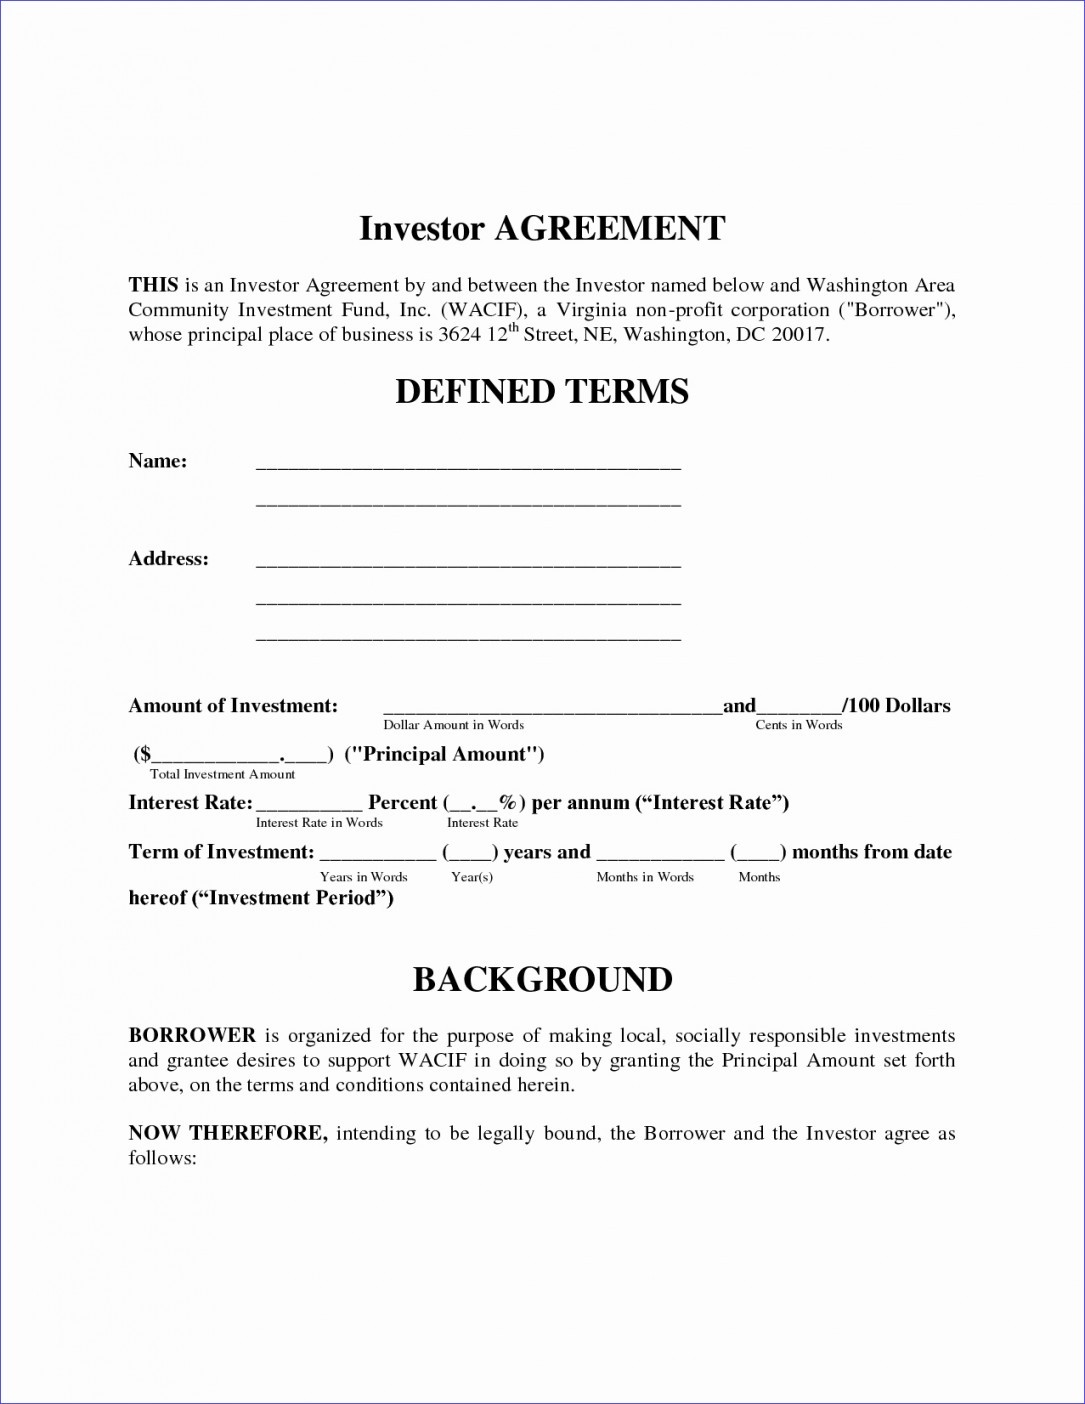 Simple Investment Agreement Template Lostranquillos Document Investors